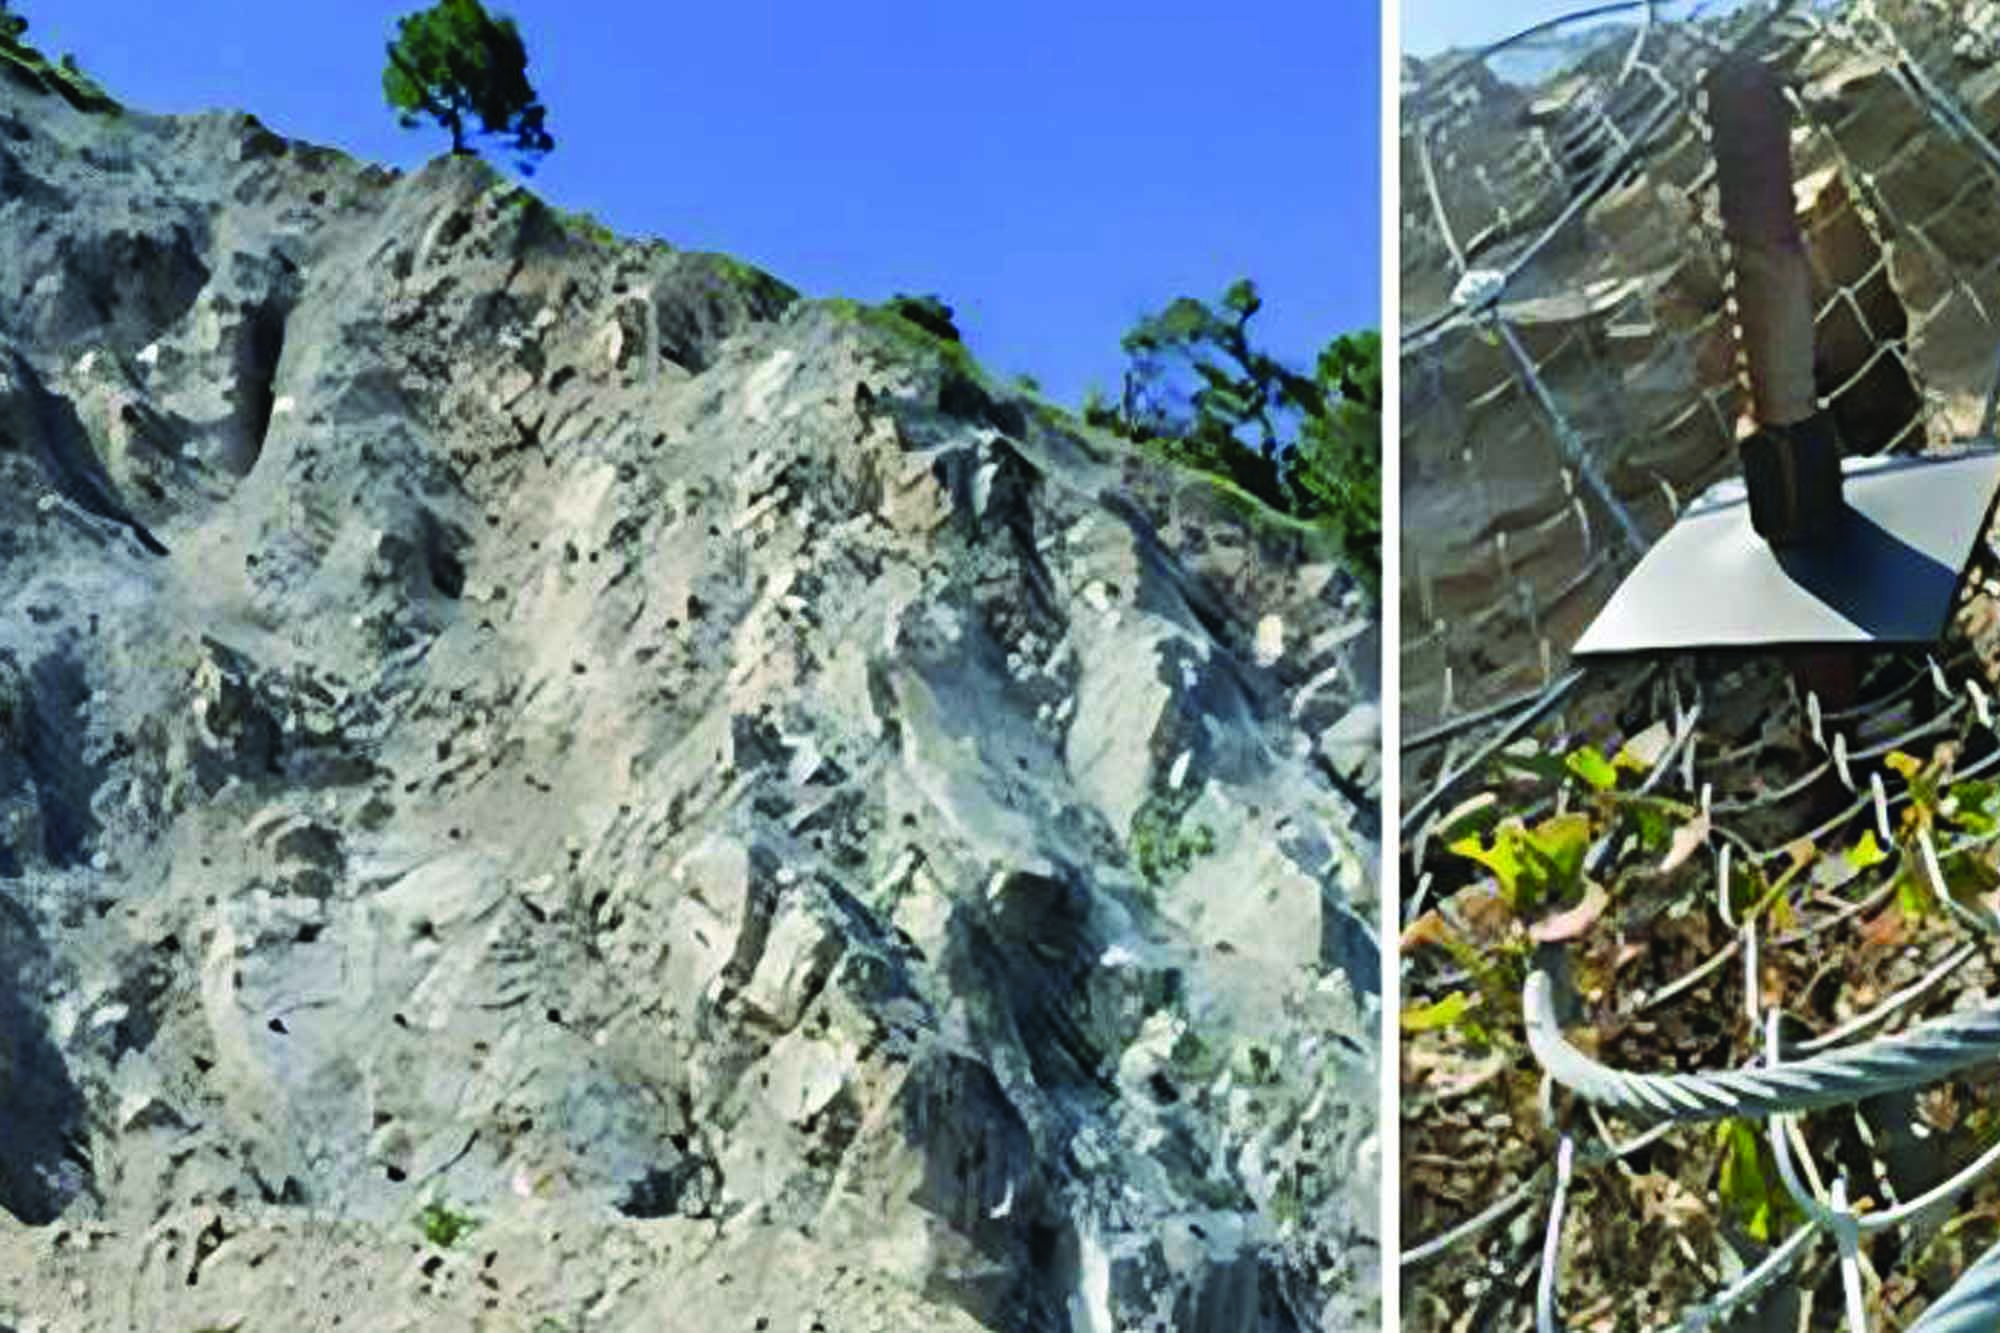 Major challenges were frequent landslides/rockfalls in Uttarakhand due to the adverse geological and topographical conditions accompanied by heavy rainfall. Also, the investigation area Chamba region, falls in Zone-IV of seismic zoning map of India.